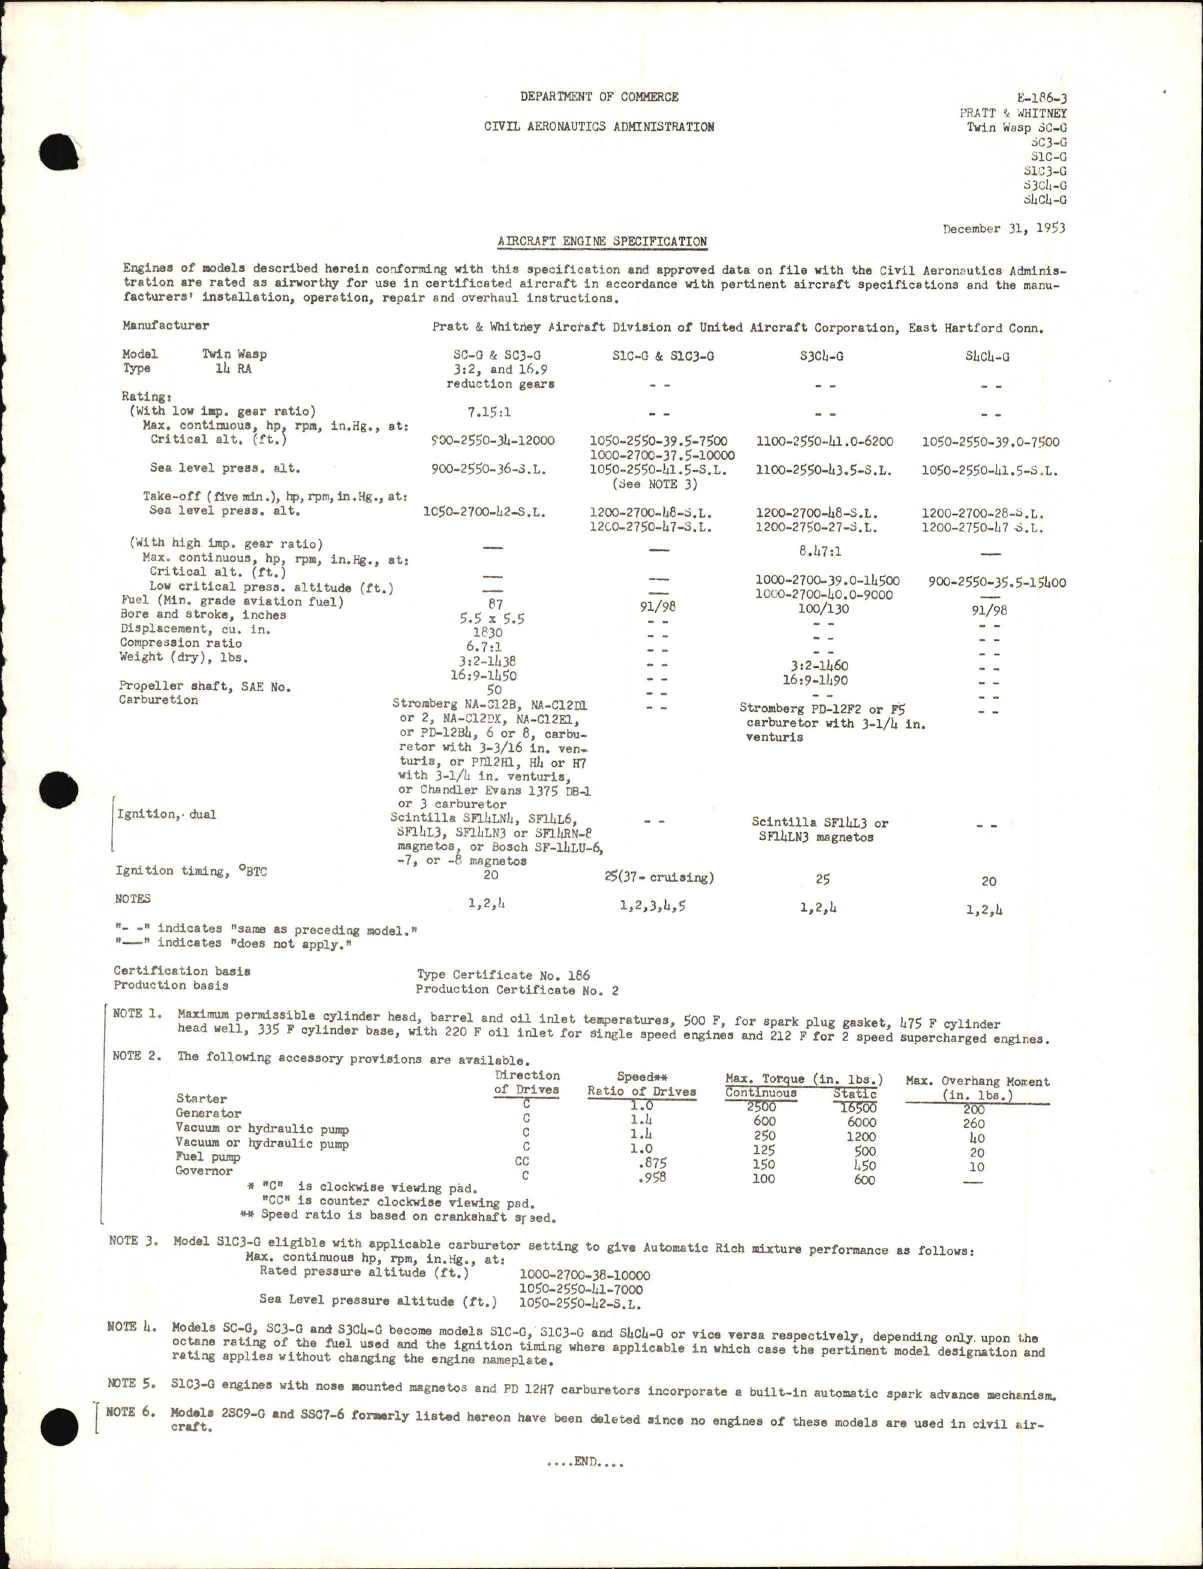 Sample page 1 from AirCorps Library document: SC-G, S1C, S3C4-G, S4C4-G Twin Wasp